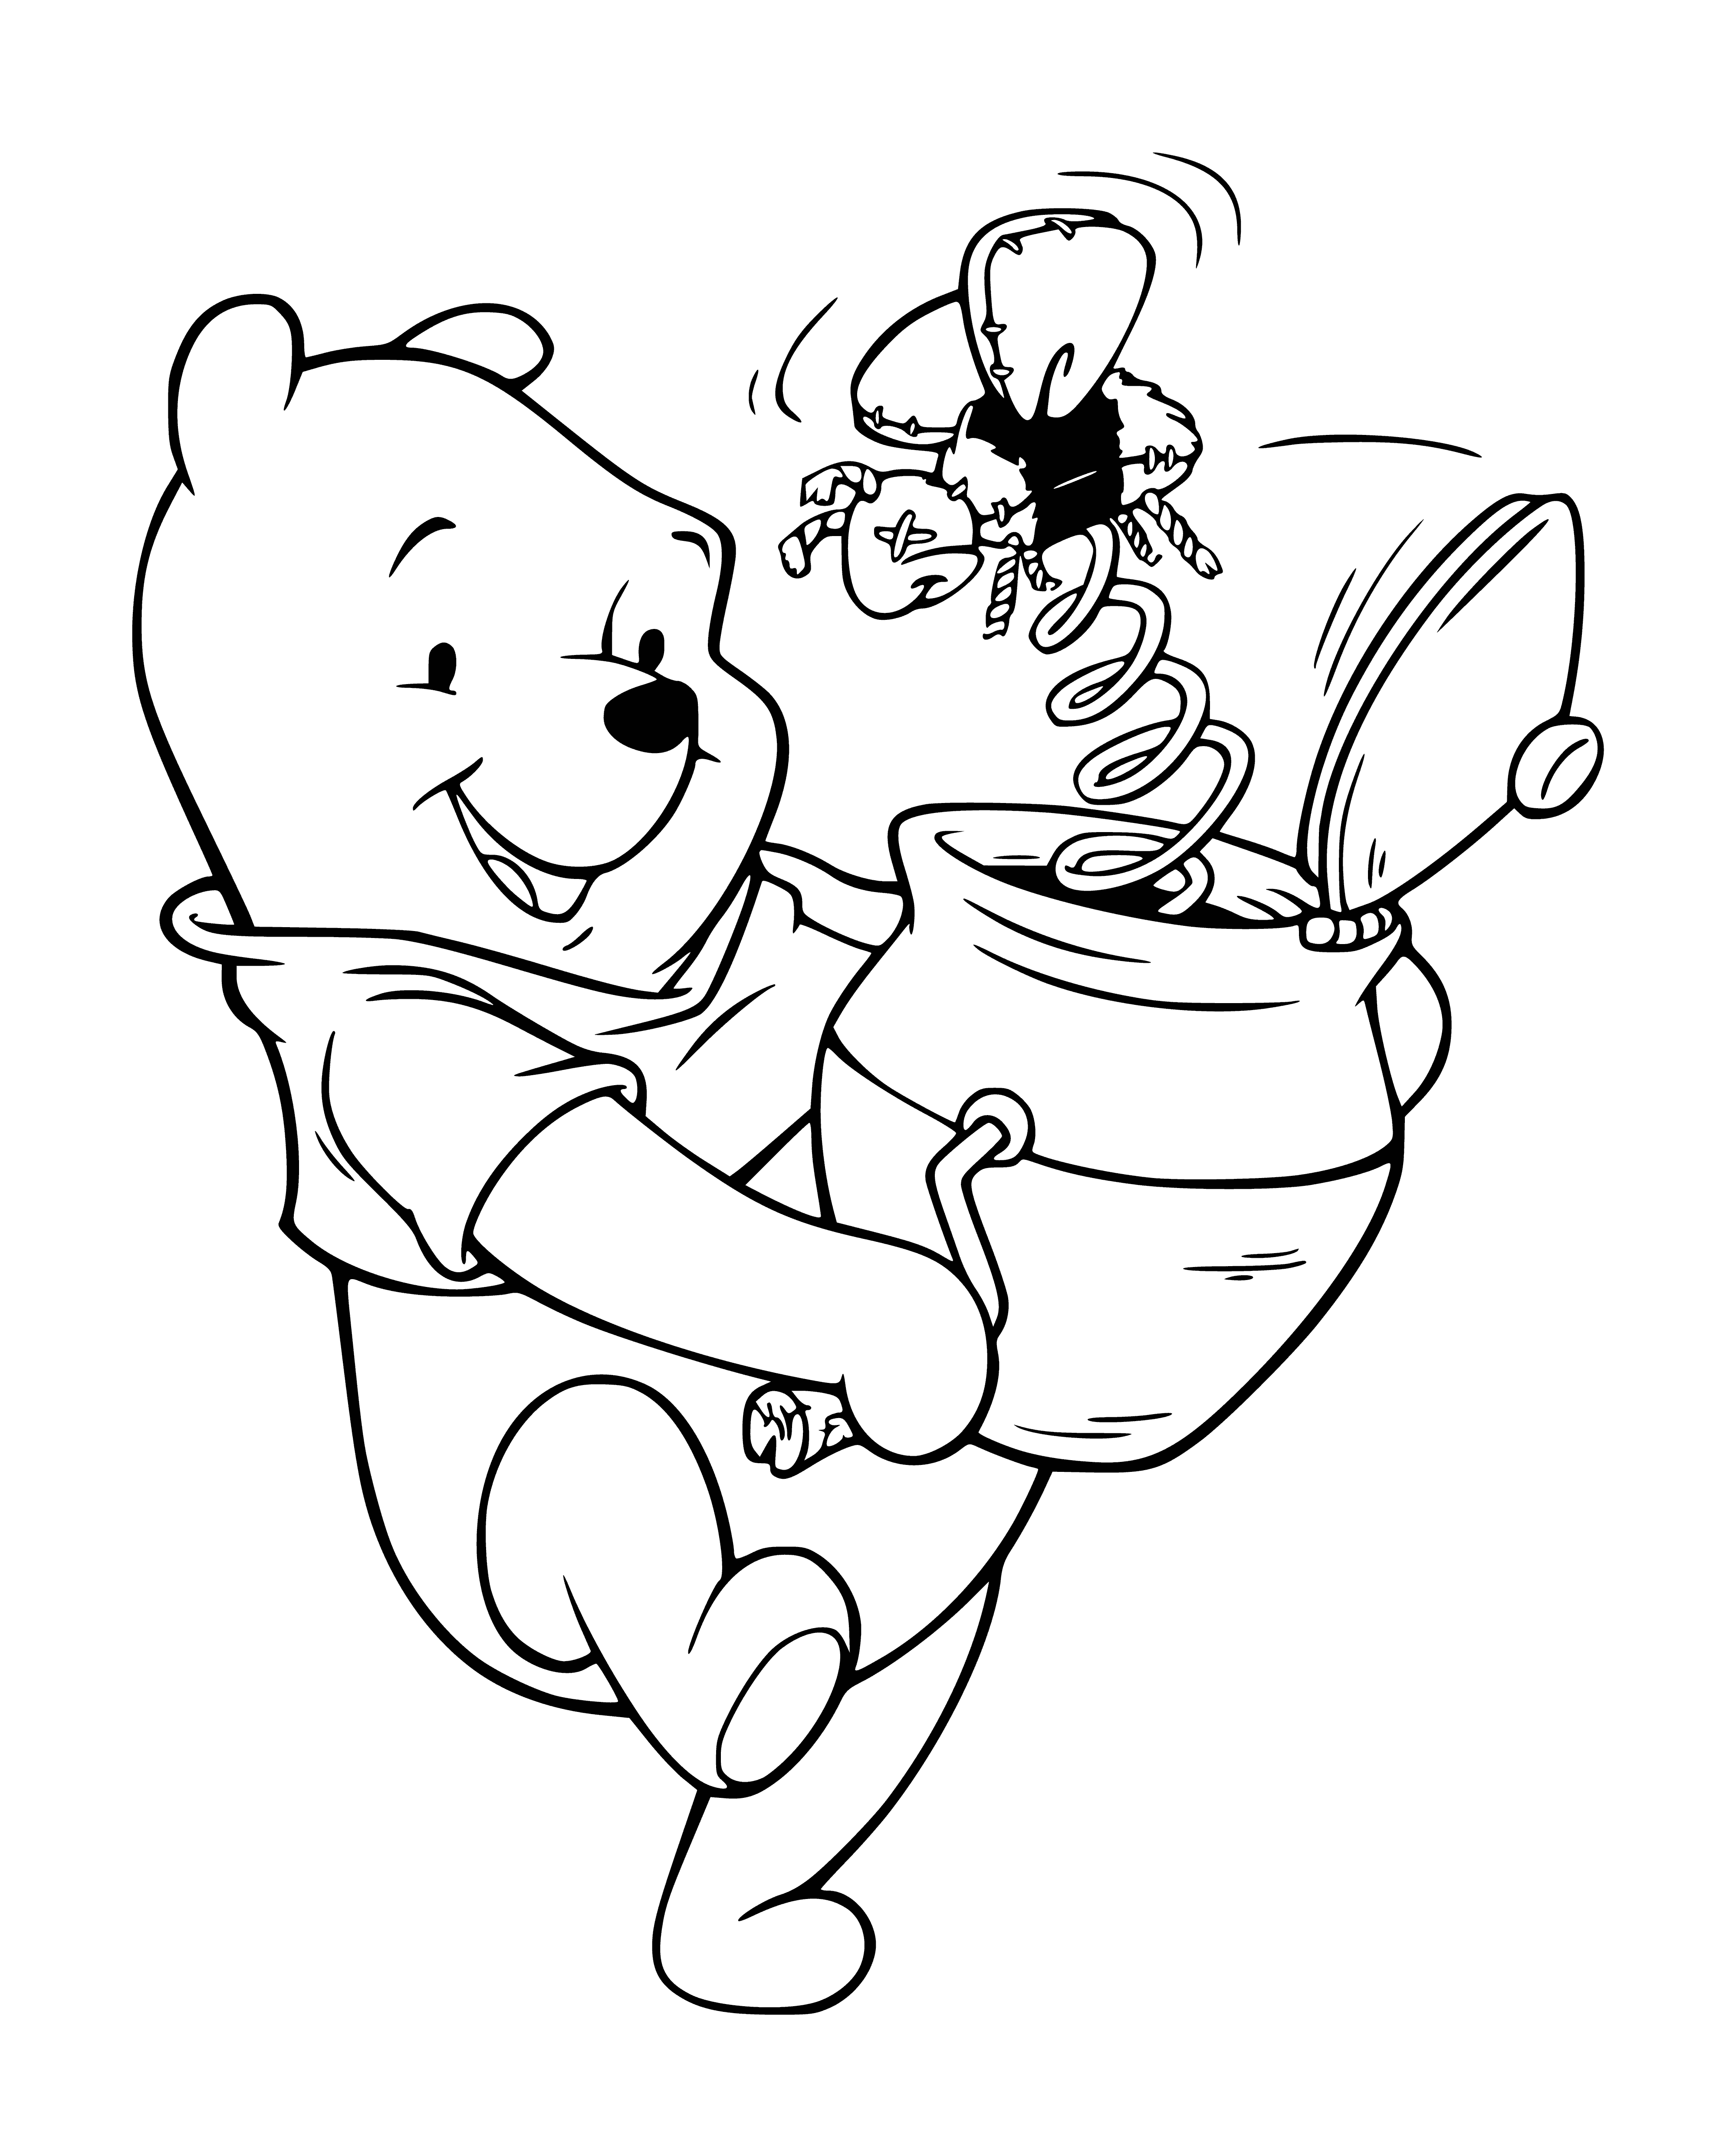 coloring page: Winnie the Pooh stands in front of tree holding a red balloon & yellow pot with a bluebird perched on edge.